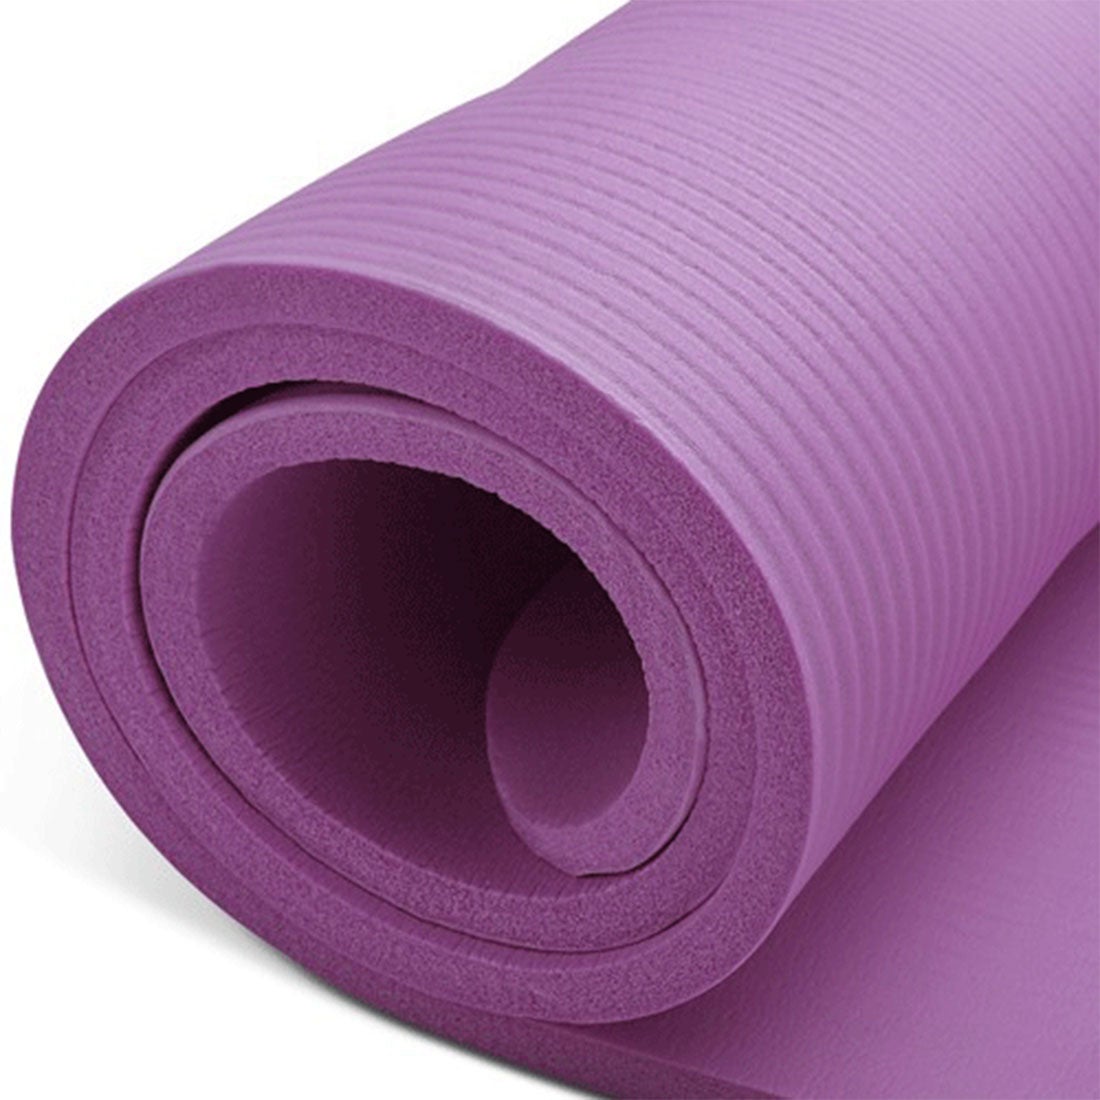 6' x 4' Large Yoga Mat, 1/3 Inch Extra Thick Yoga Mat Double-Sided Non  Slip, Professional TPE Yoga Mats for Women Men, 24 Sq.Ft Large Exercise Mat  for